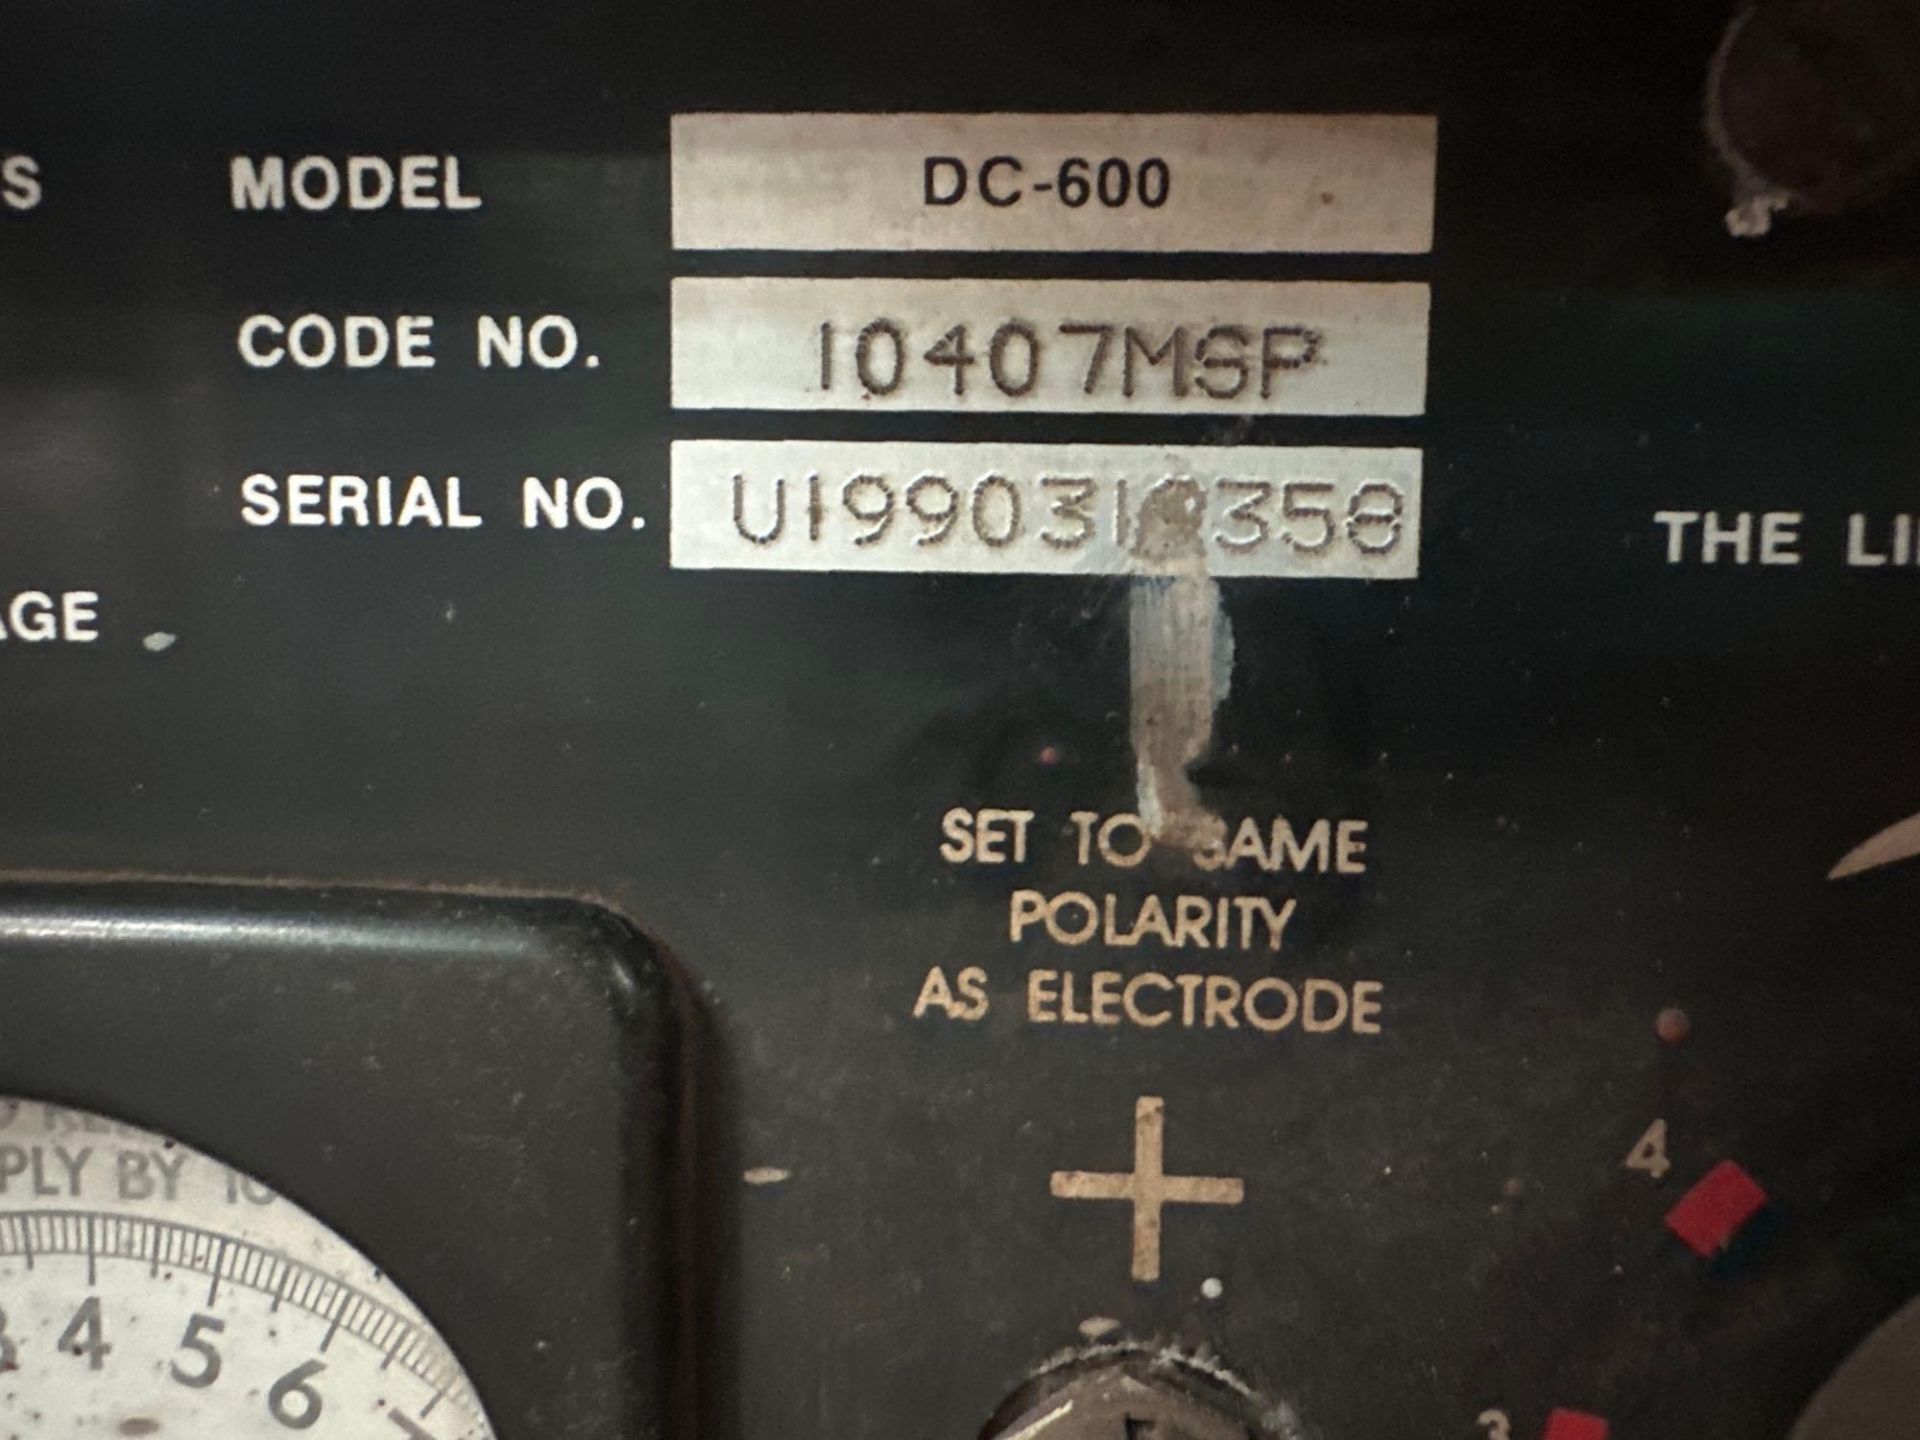 Lincoln Electric Idealarc DC-600 Welder, s/n U1990319358 *Located in Redlands, CA* - Image 6 of 8